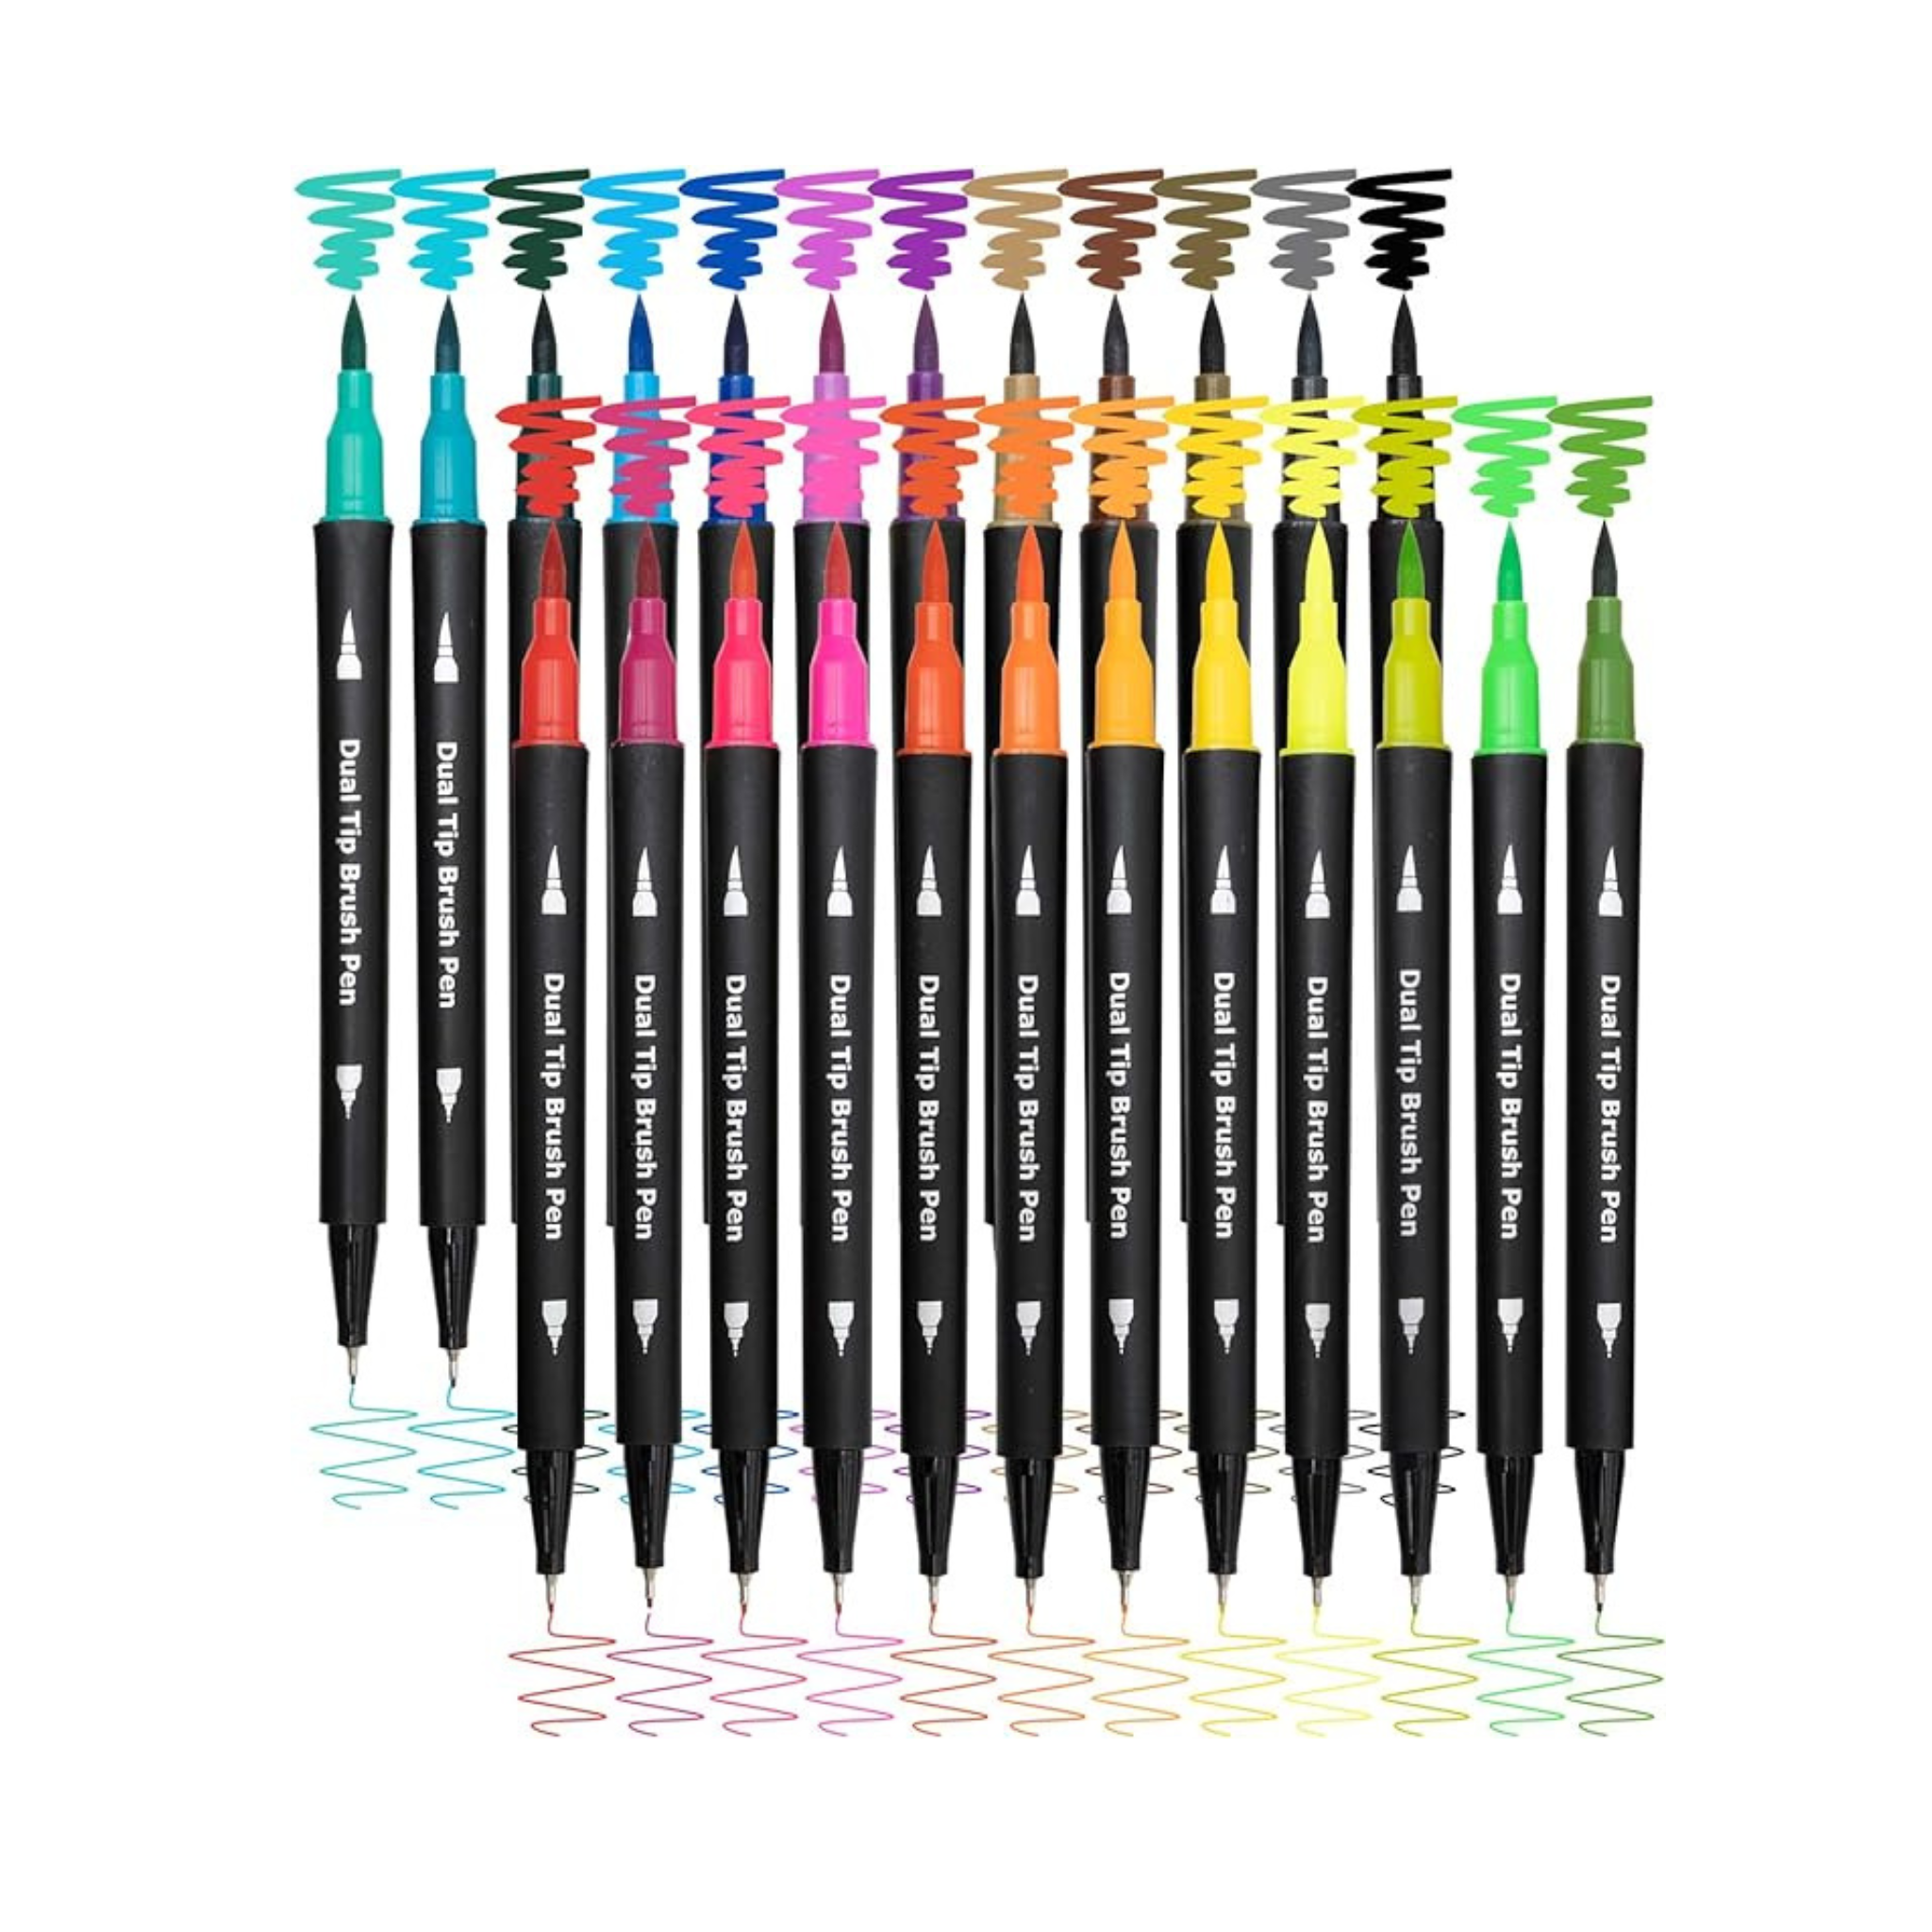 24-Count Piochoo Fine Point and Brush Tip Art Markers